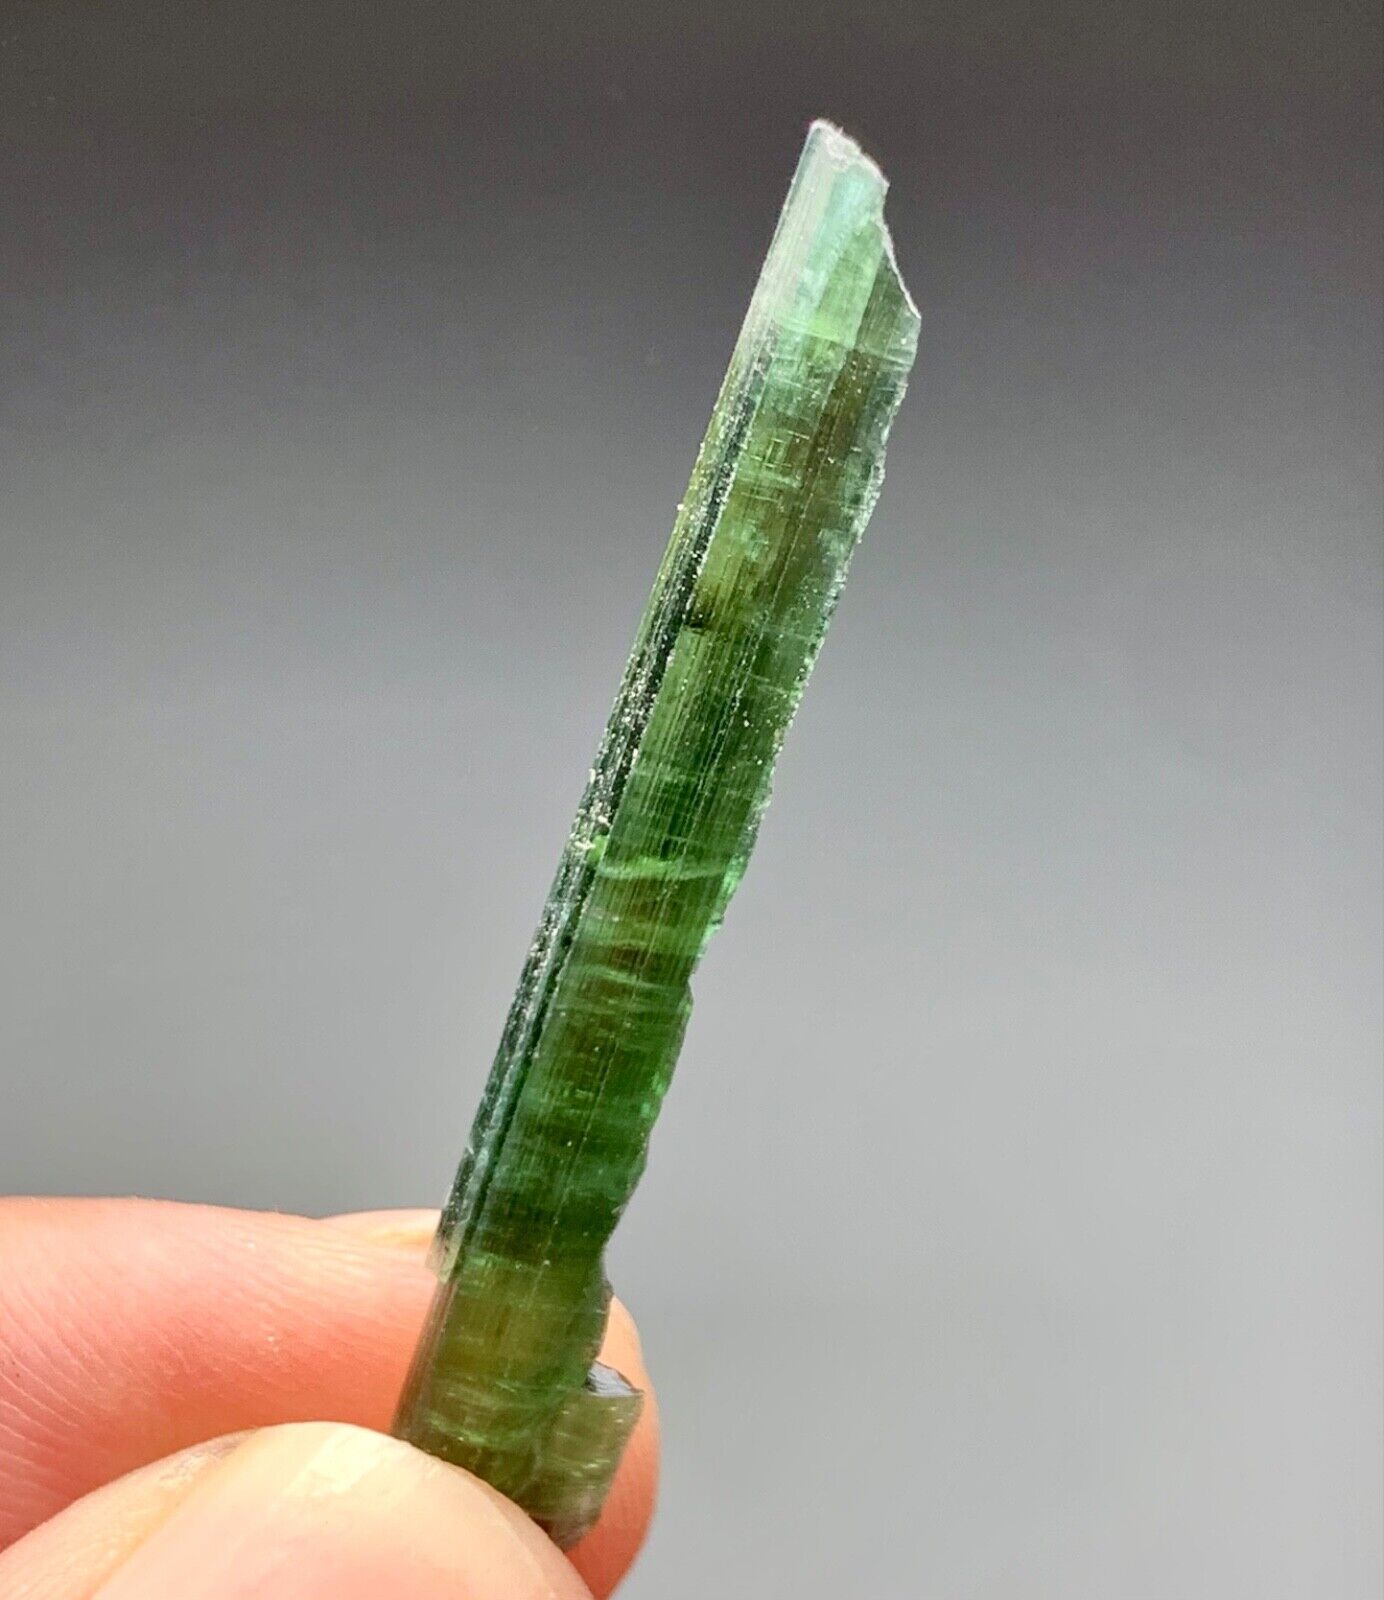 8 Cts Beautiful Quality  Tourmaline Crystal Specimen from Afghanistan